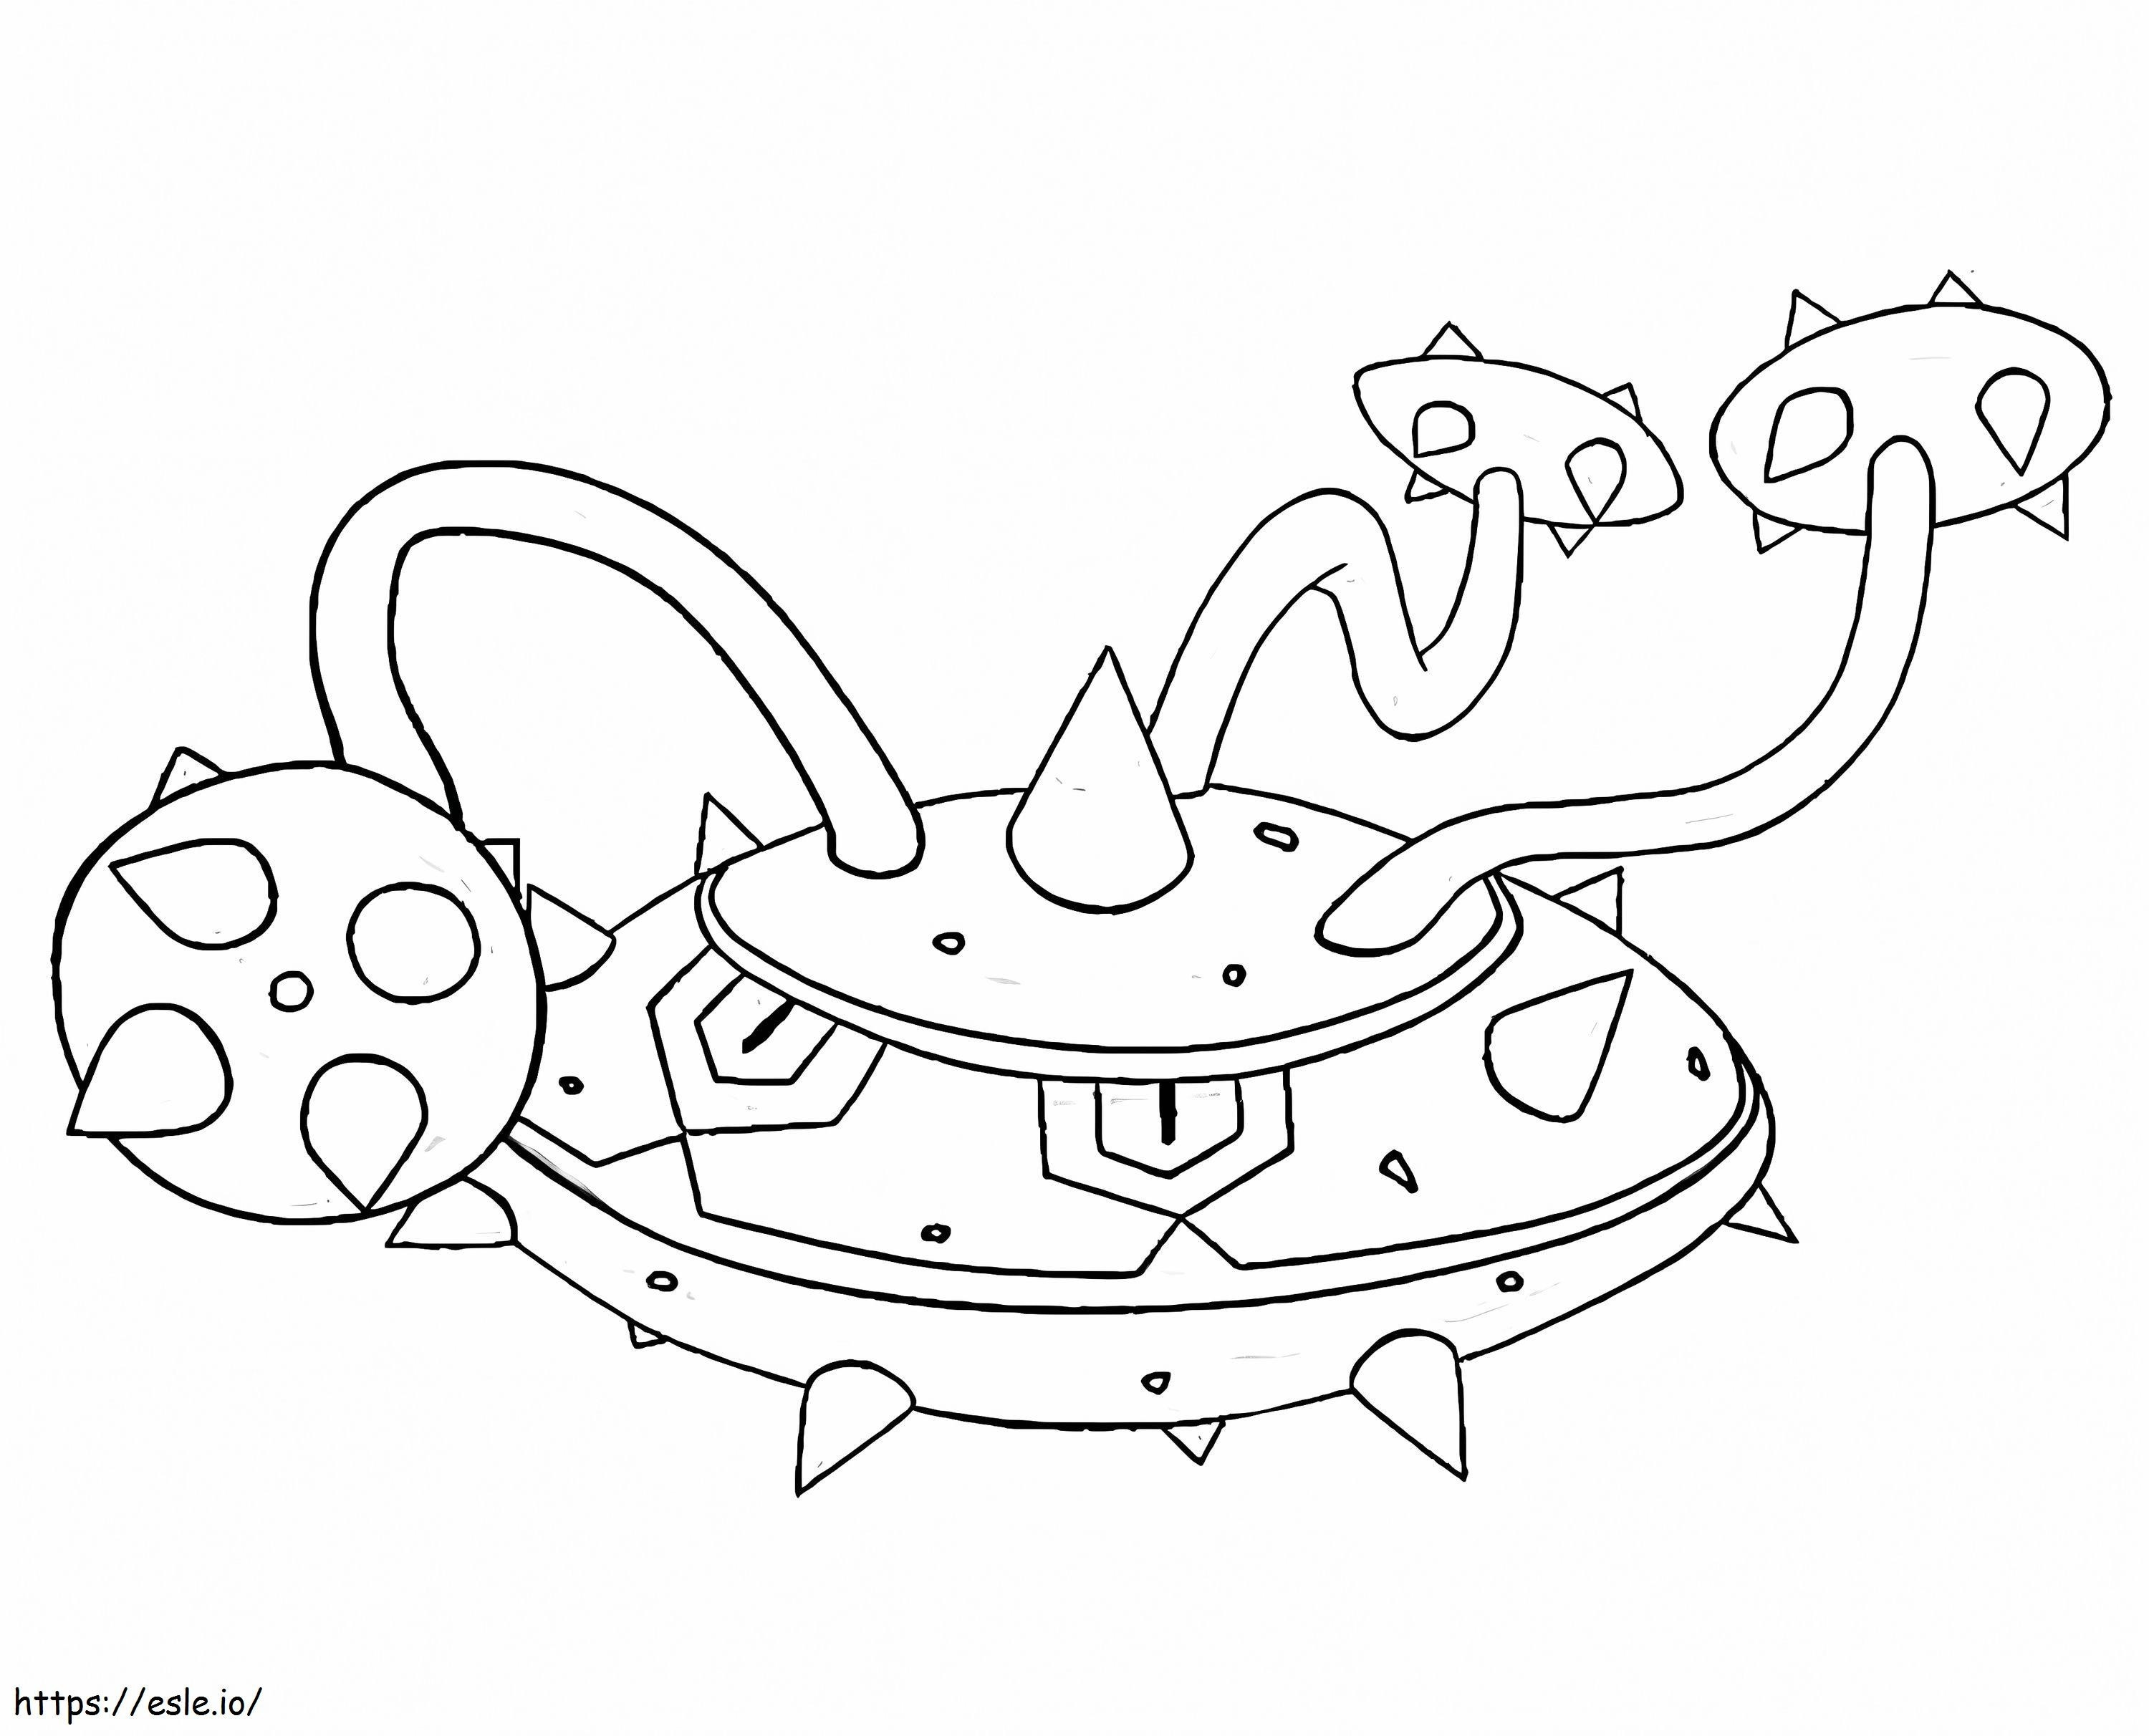 Ferrothorn Pokemon 2 coloring page